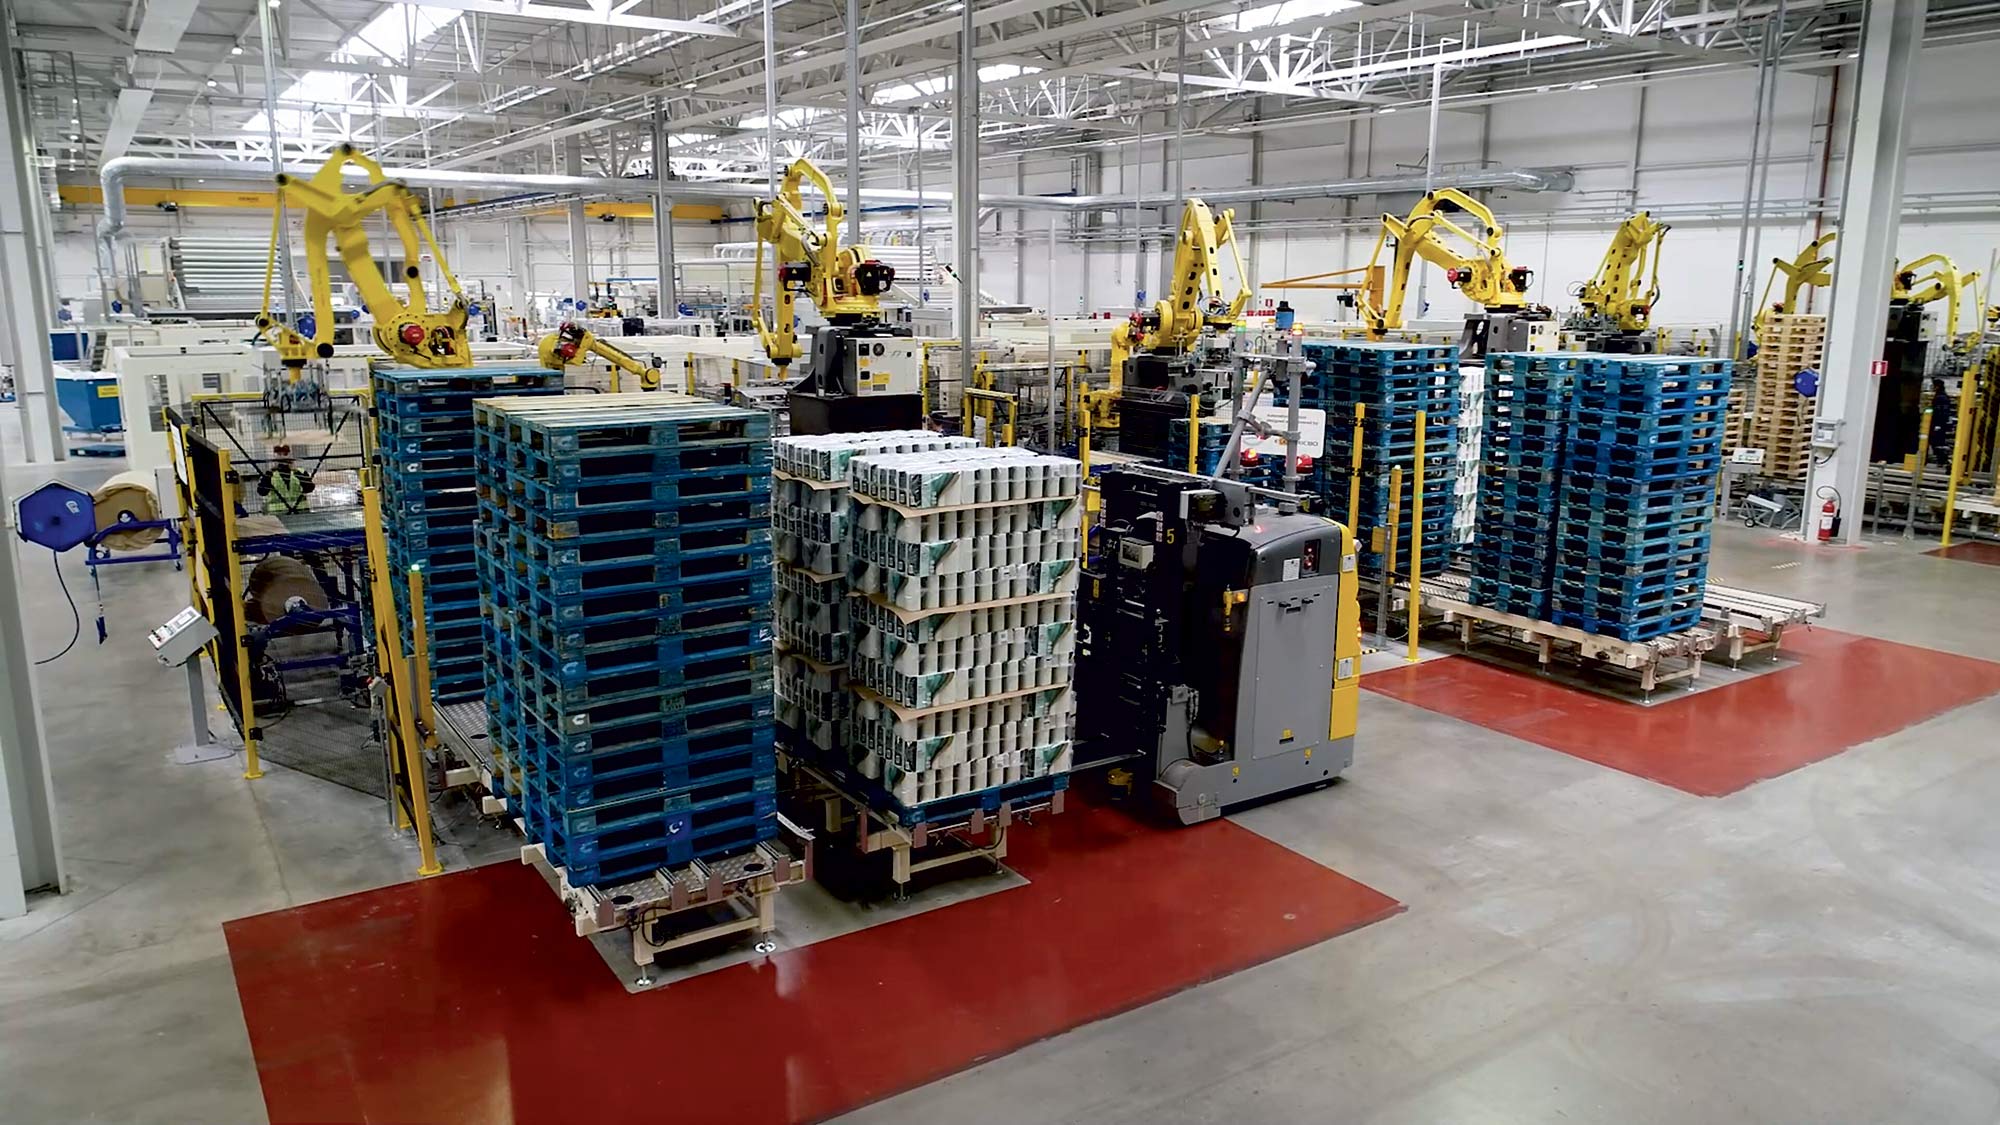 Ensuring safe, efficient, and sustainable material handling through automation is now a necessity.